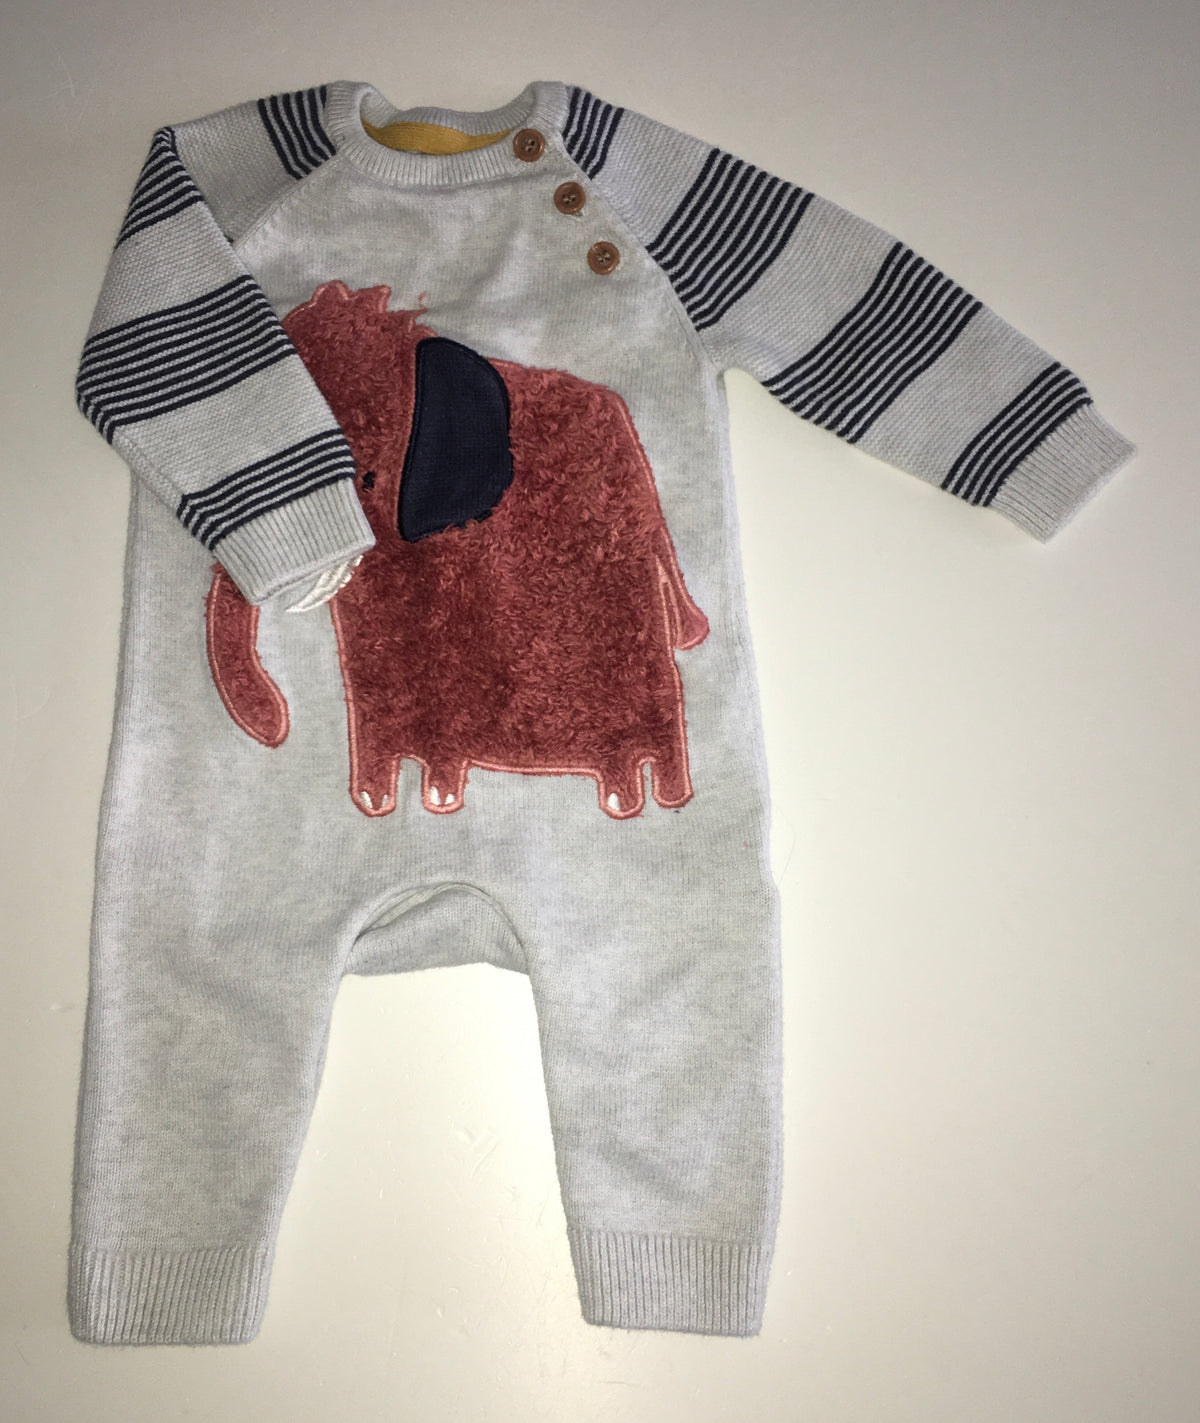 Mothercare Romper, Boys 3-6 Months